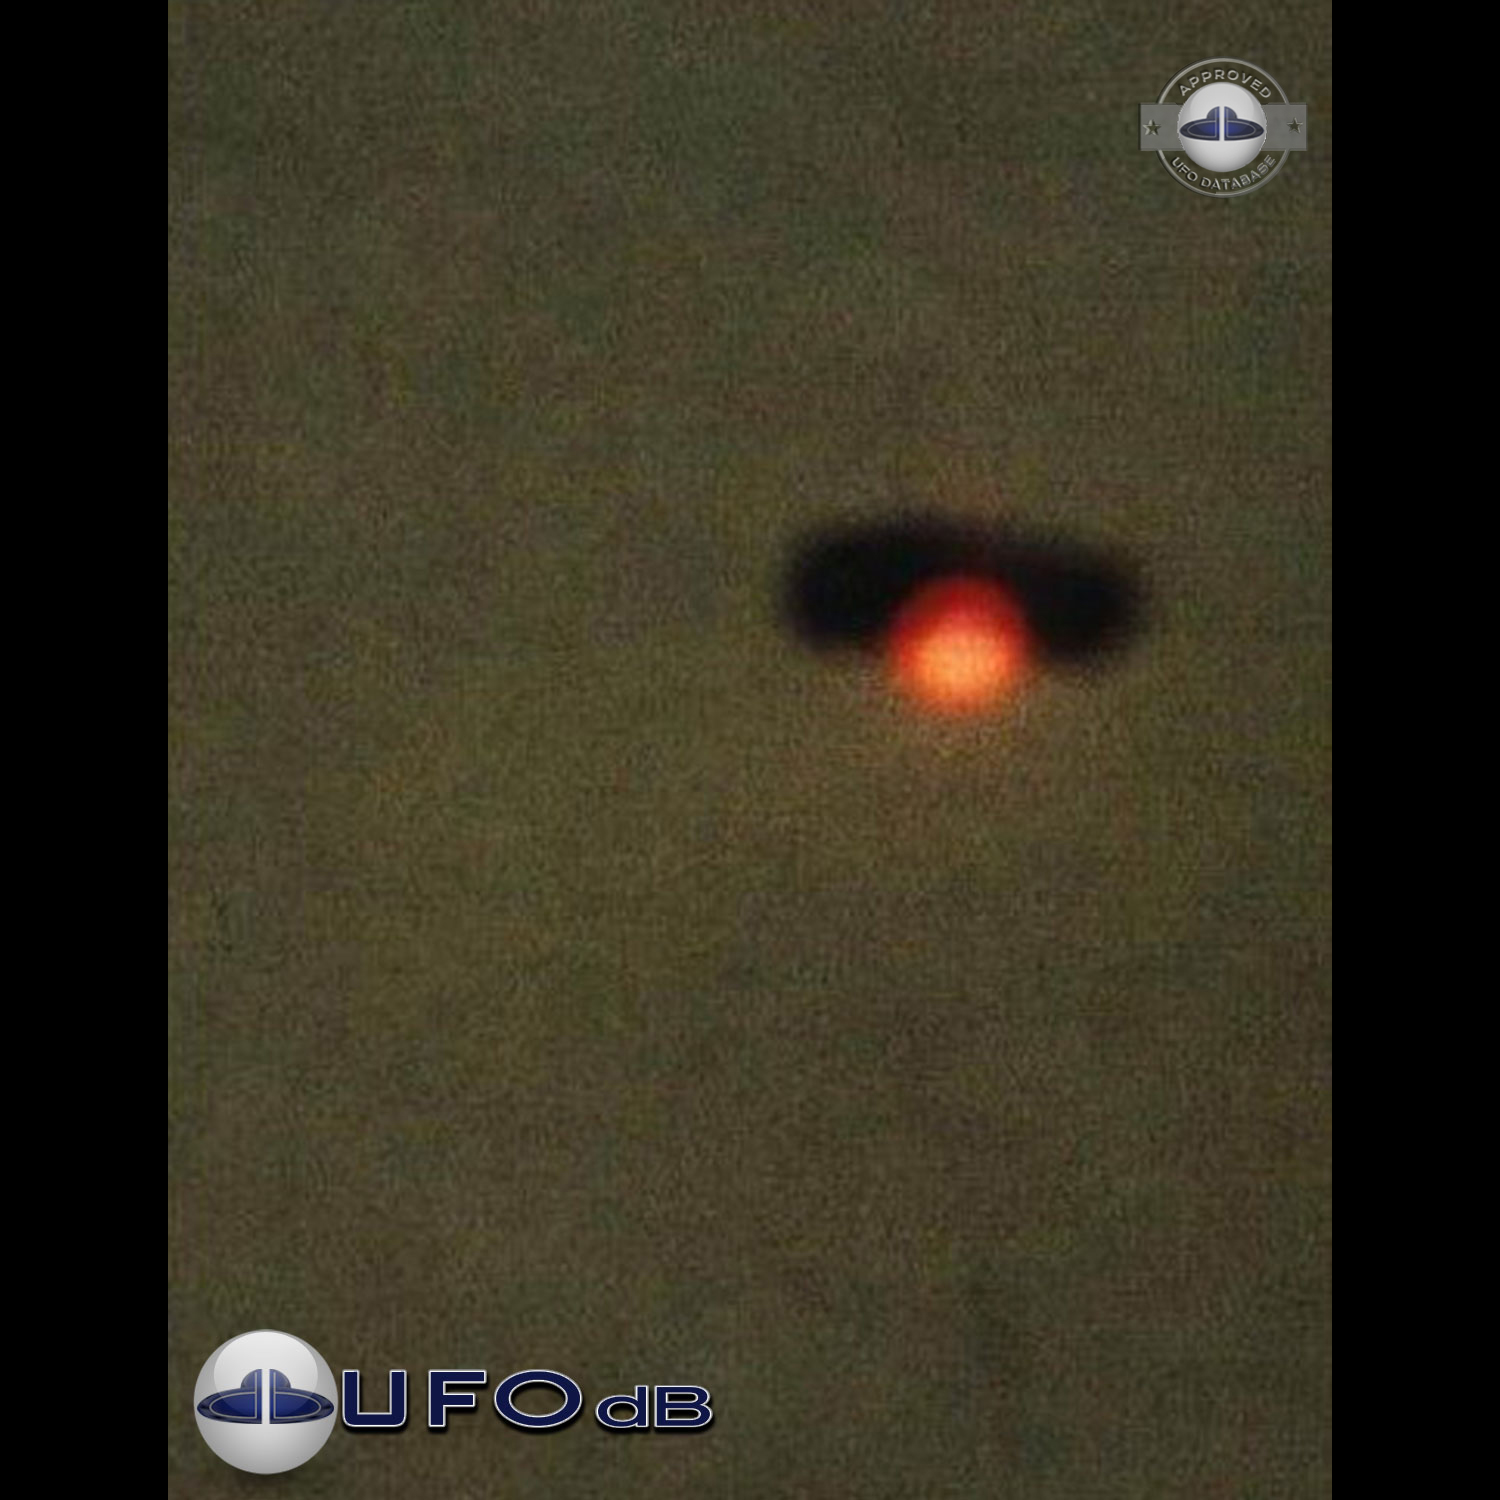 1993 UFO picture - part of The Gulf Breeze UFO incident - Florida USA UFO Picture #133-1